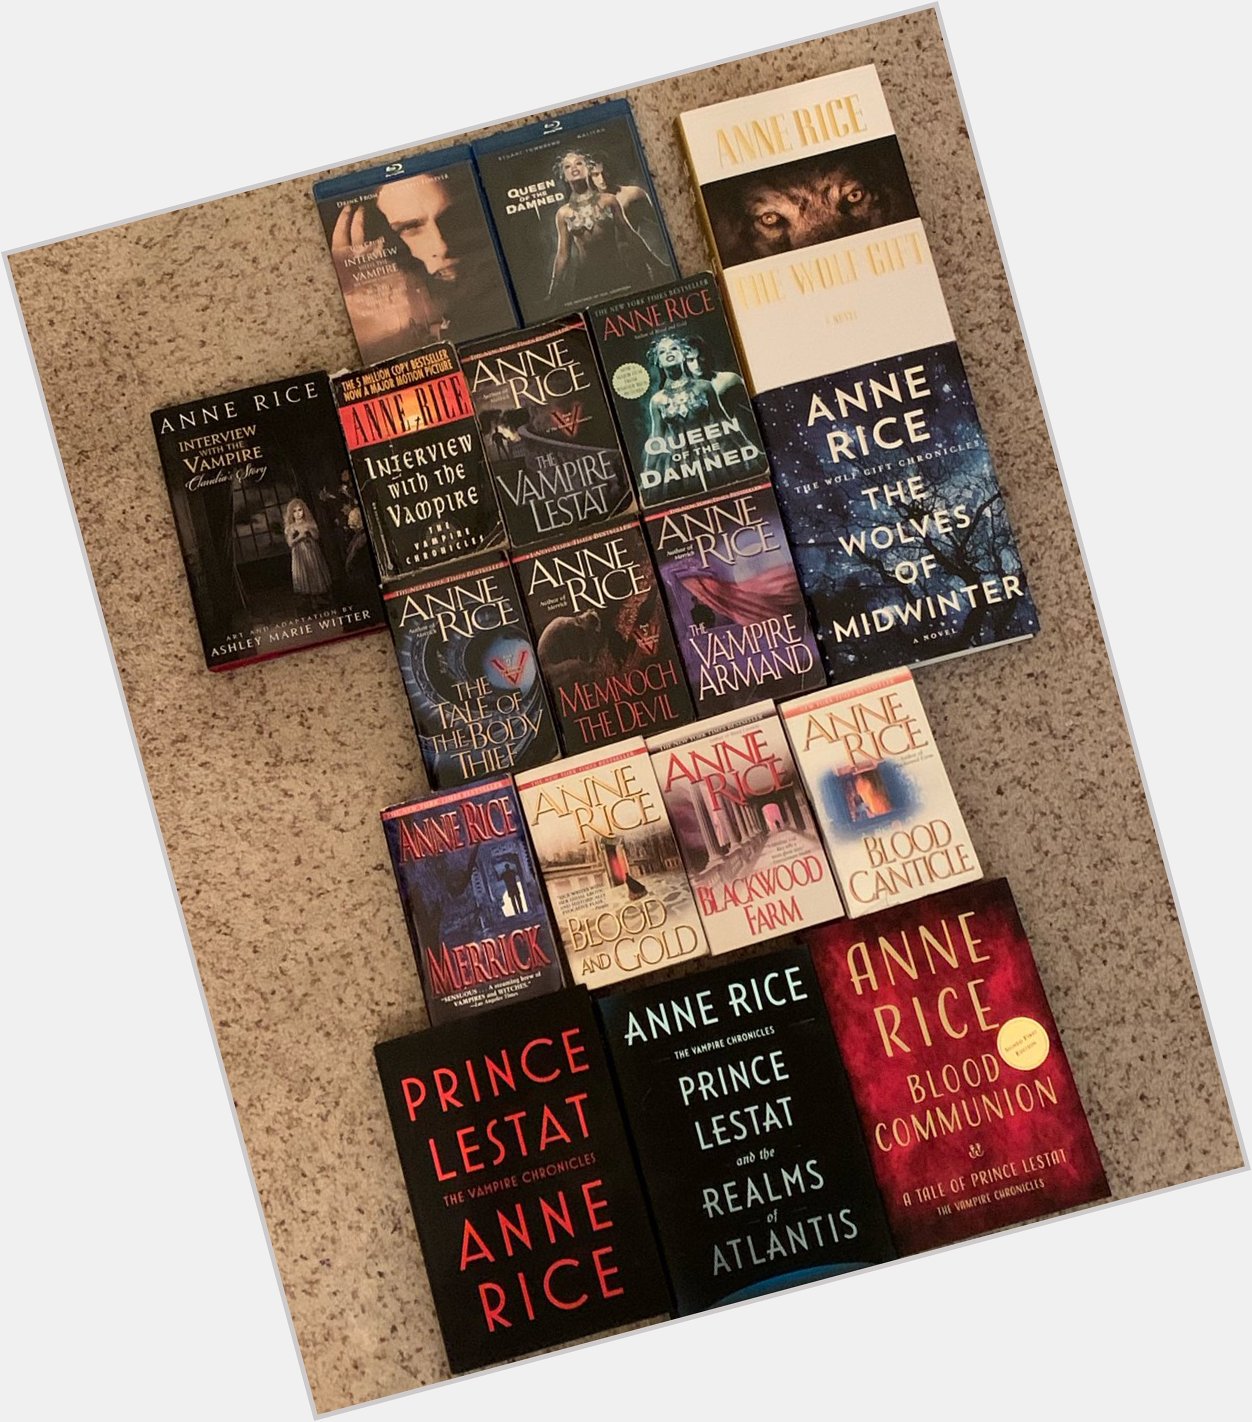 Happy Birthday to Anne Rice!  What is your favorite Anne Rice novel? 